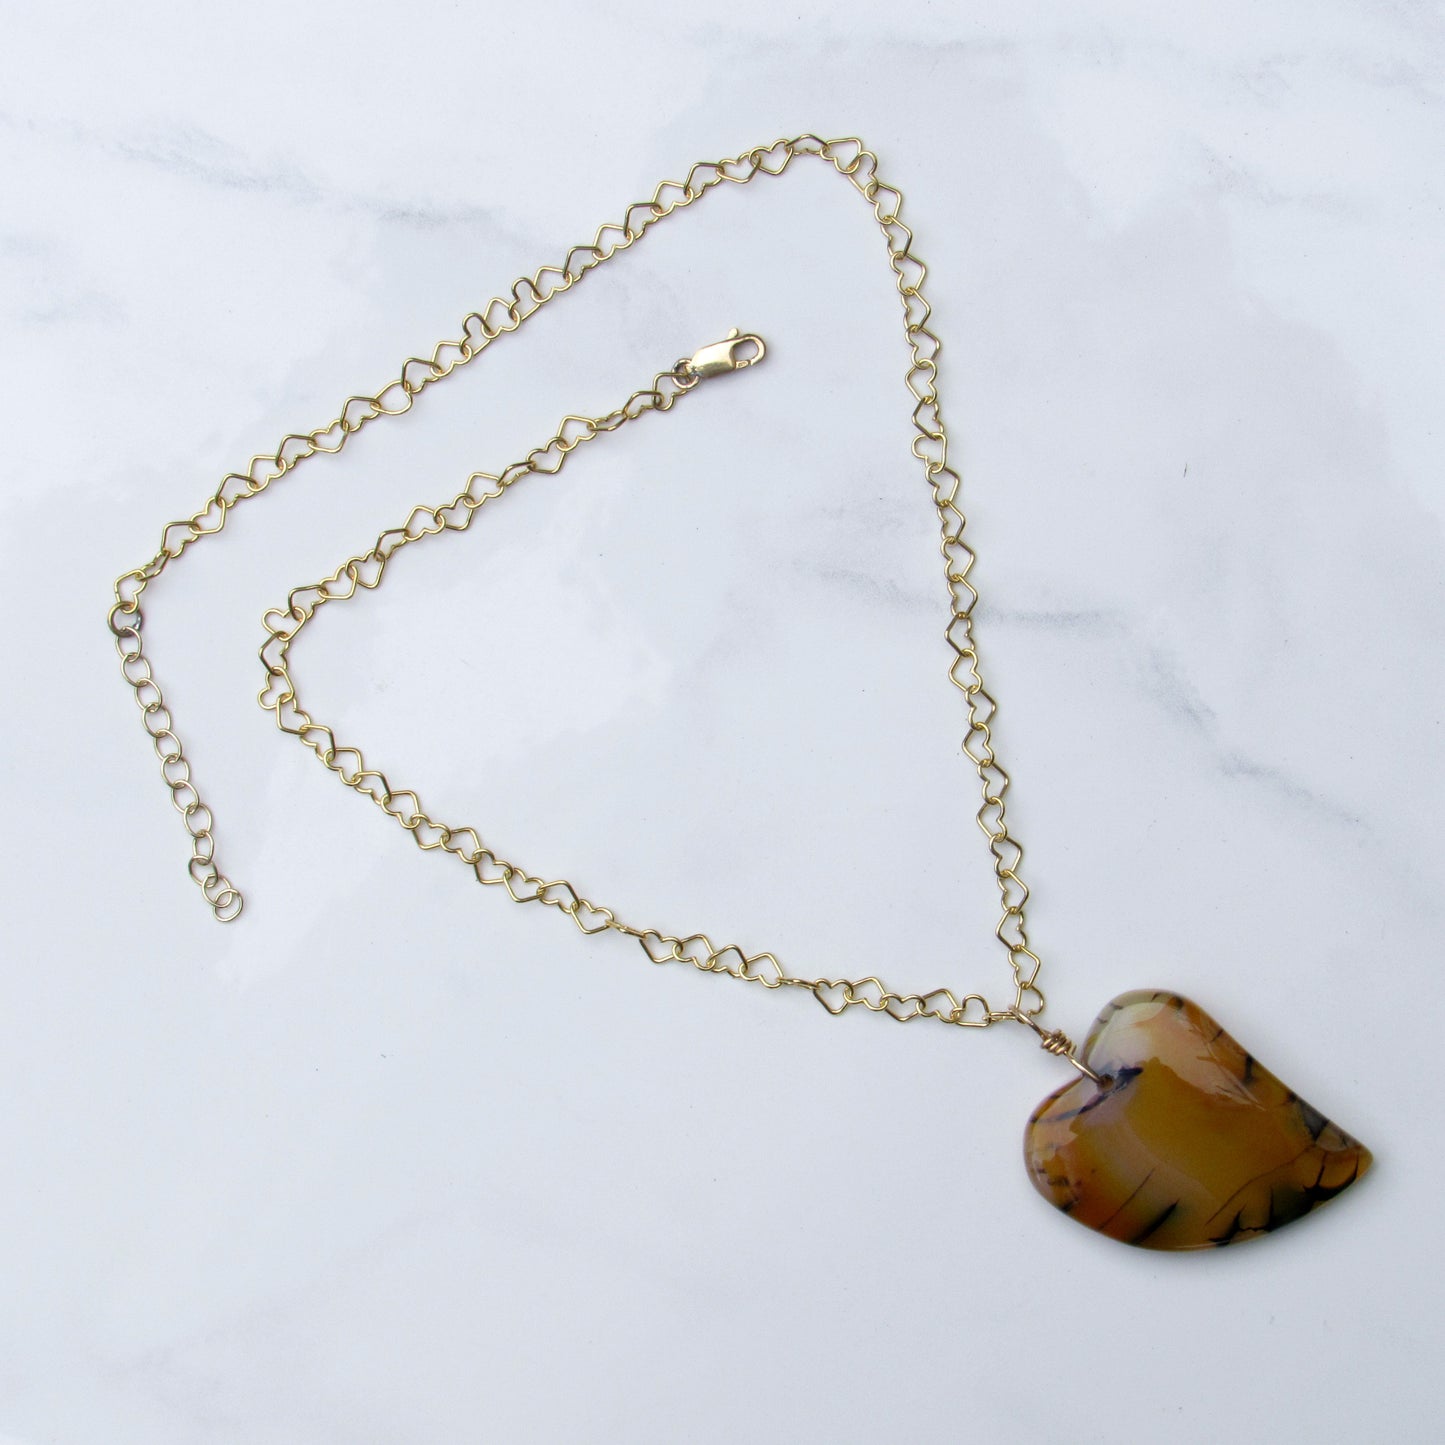 Dragon’s Vein Agate gemstone heart on gold heart chain necklace